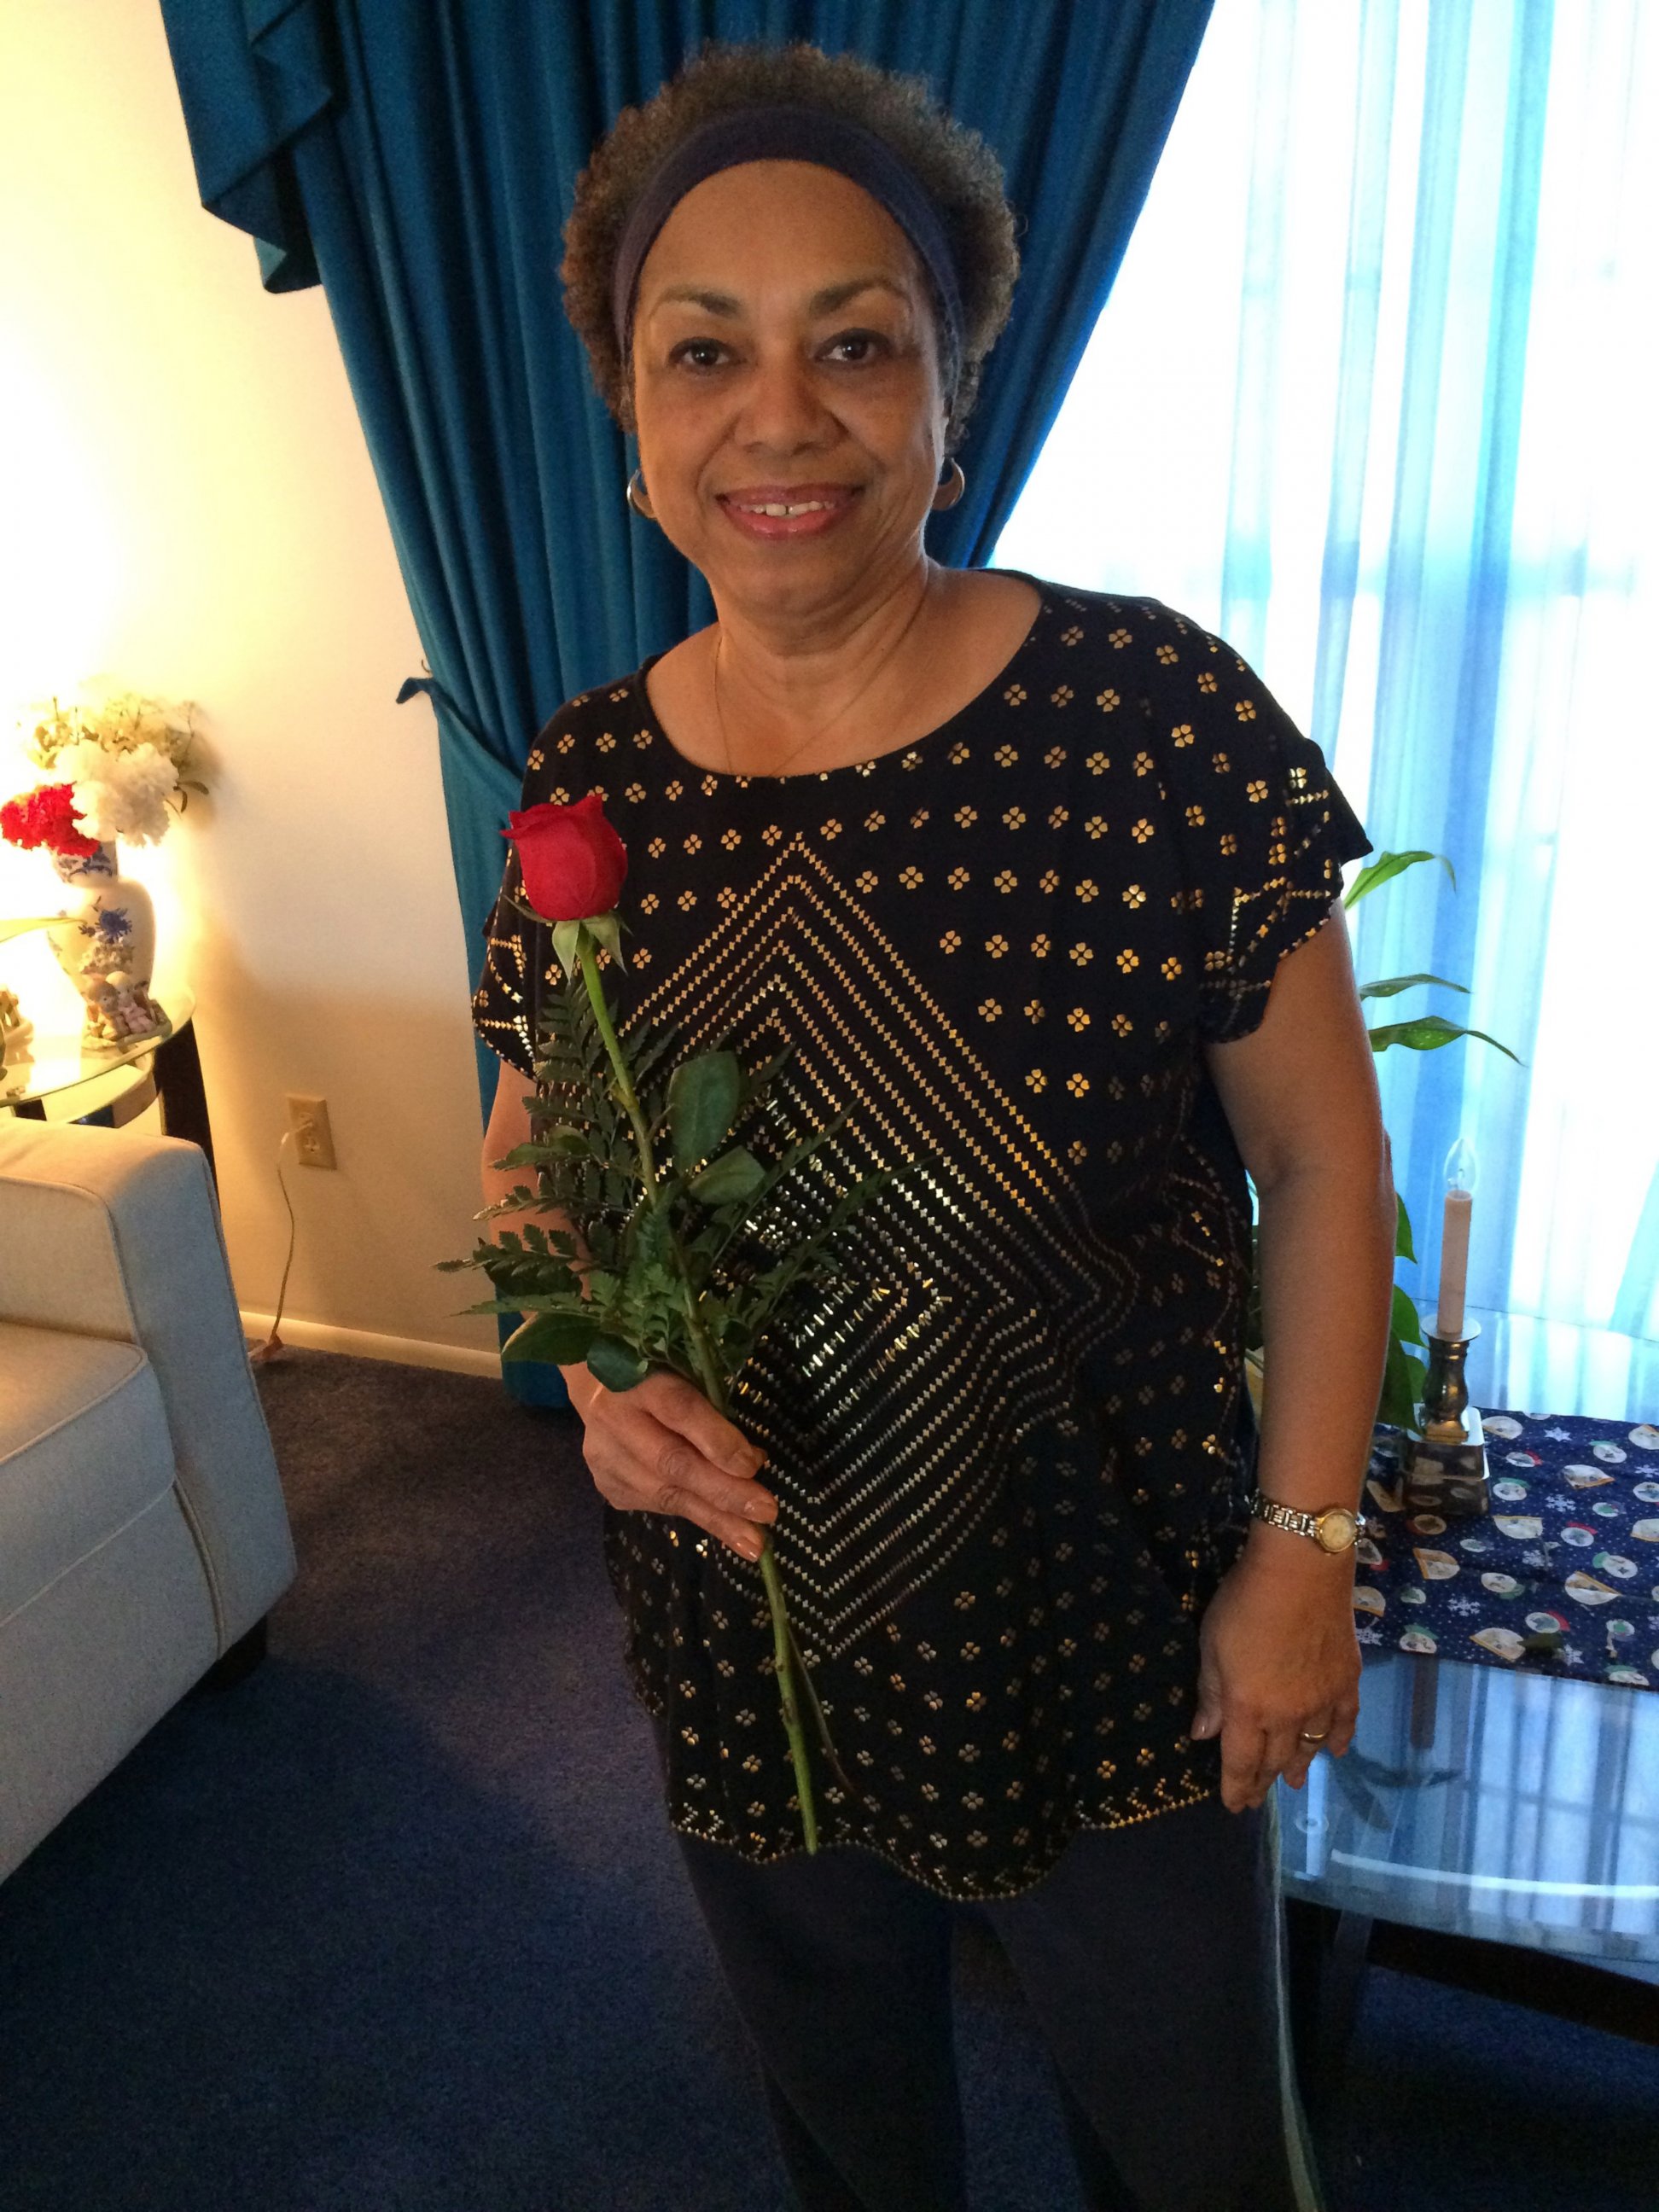 PHOTO: Husband Phil Ikehorn has sent his wife Evelyn a red rose every single Monday for 30 years.